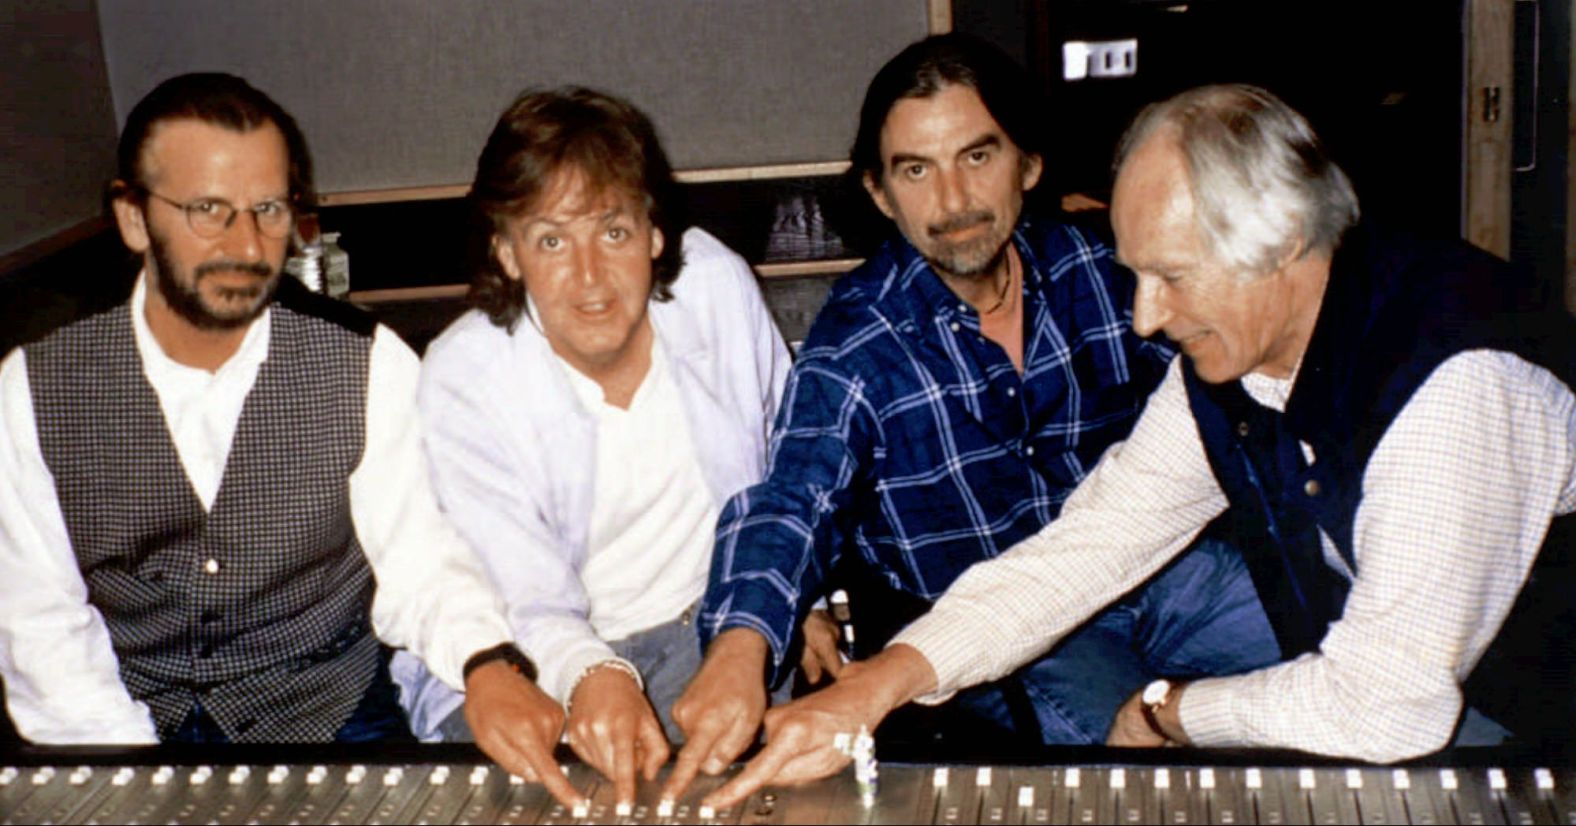 From left, Starr, McCartney, Harrison and producer George Martin get together during a recording at London's Abbey Road Studios in 1995. They worked together on a new Beatles song, "Free as a Bird."